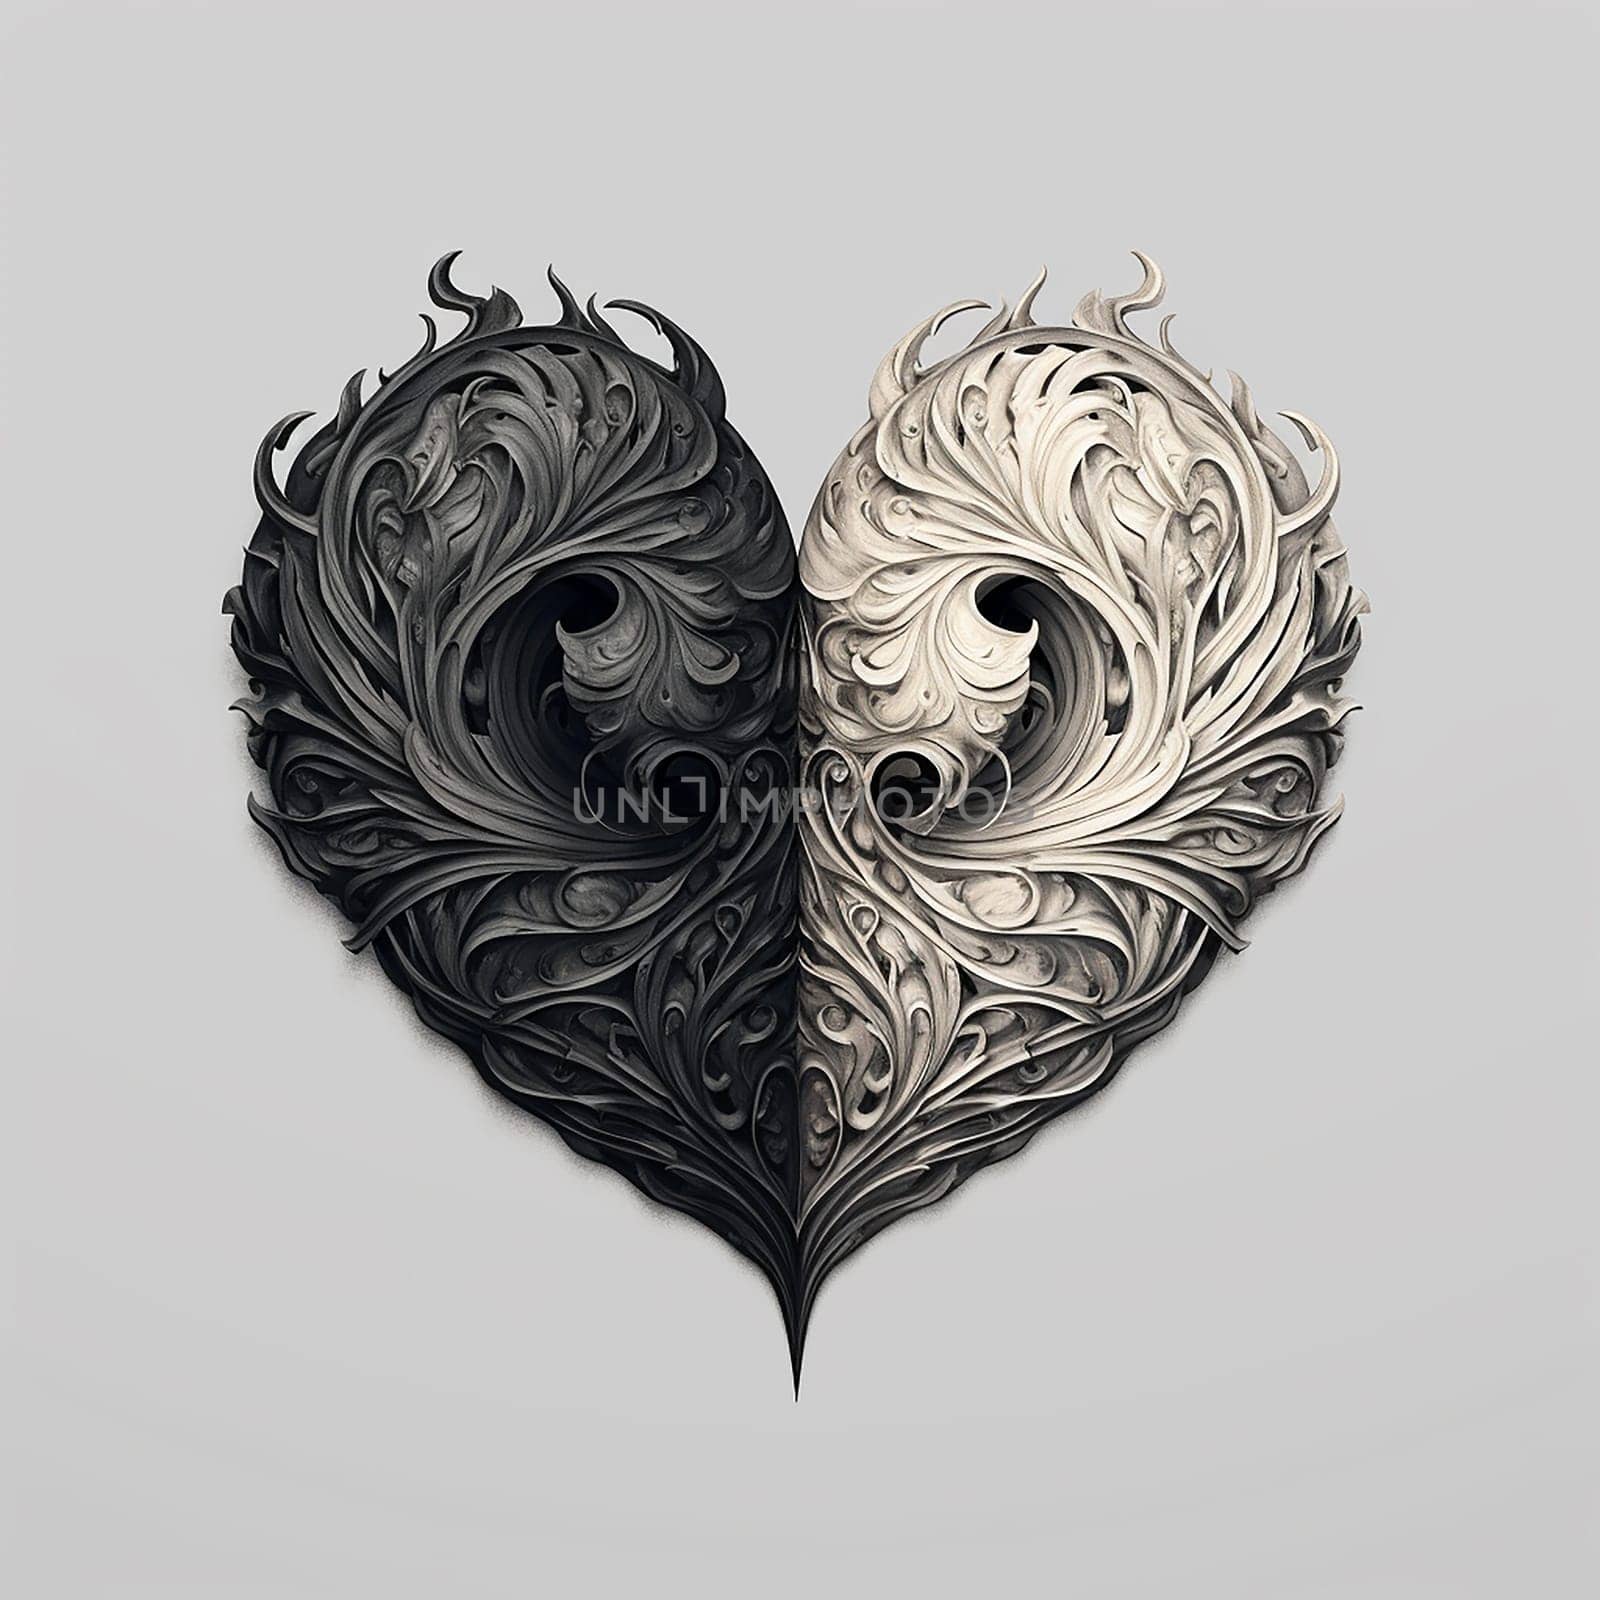 An artistic representation of a heart made with intricately designed black and white swirls